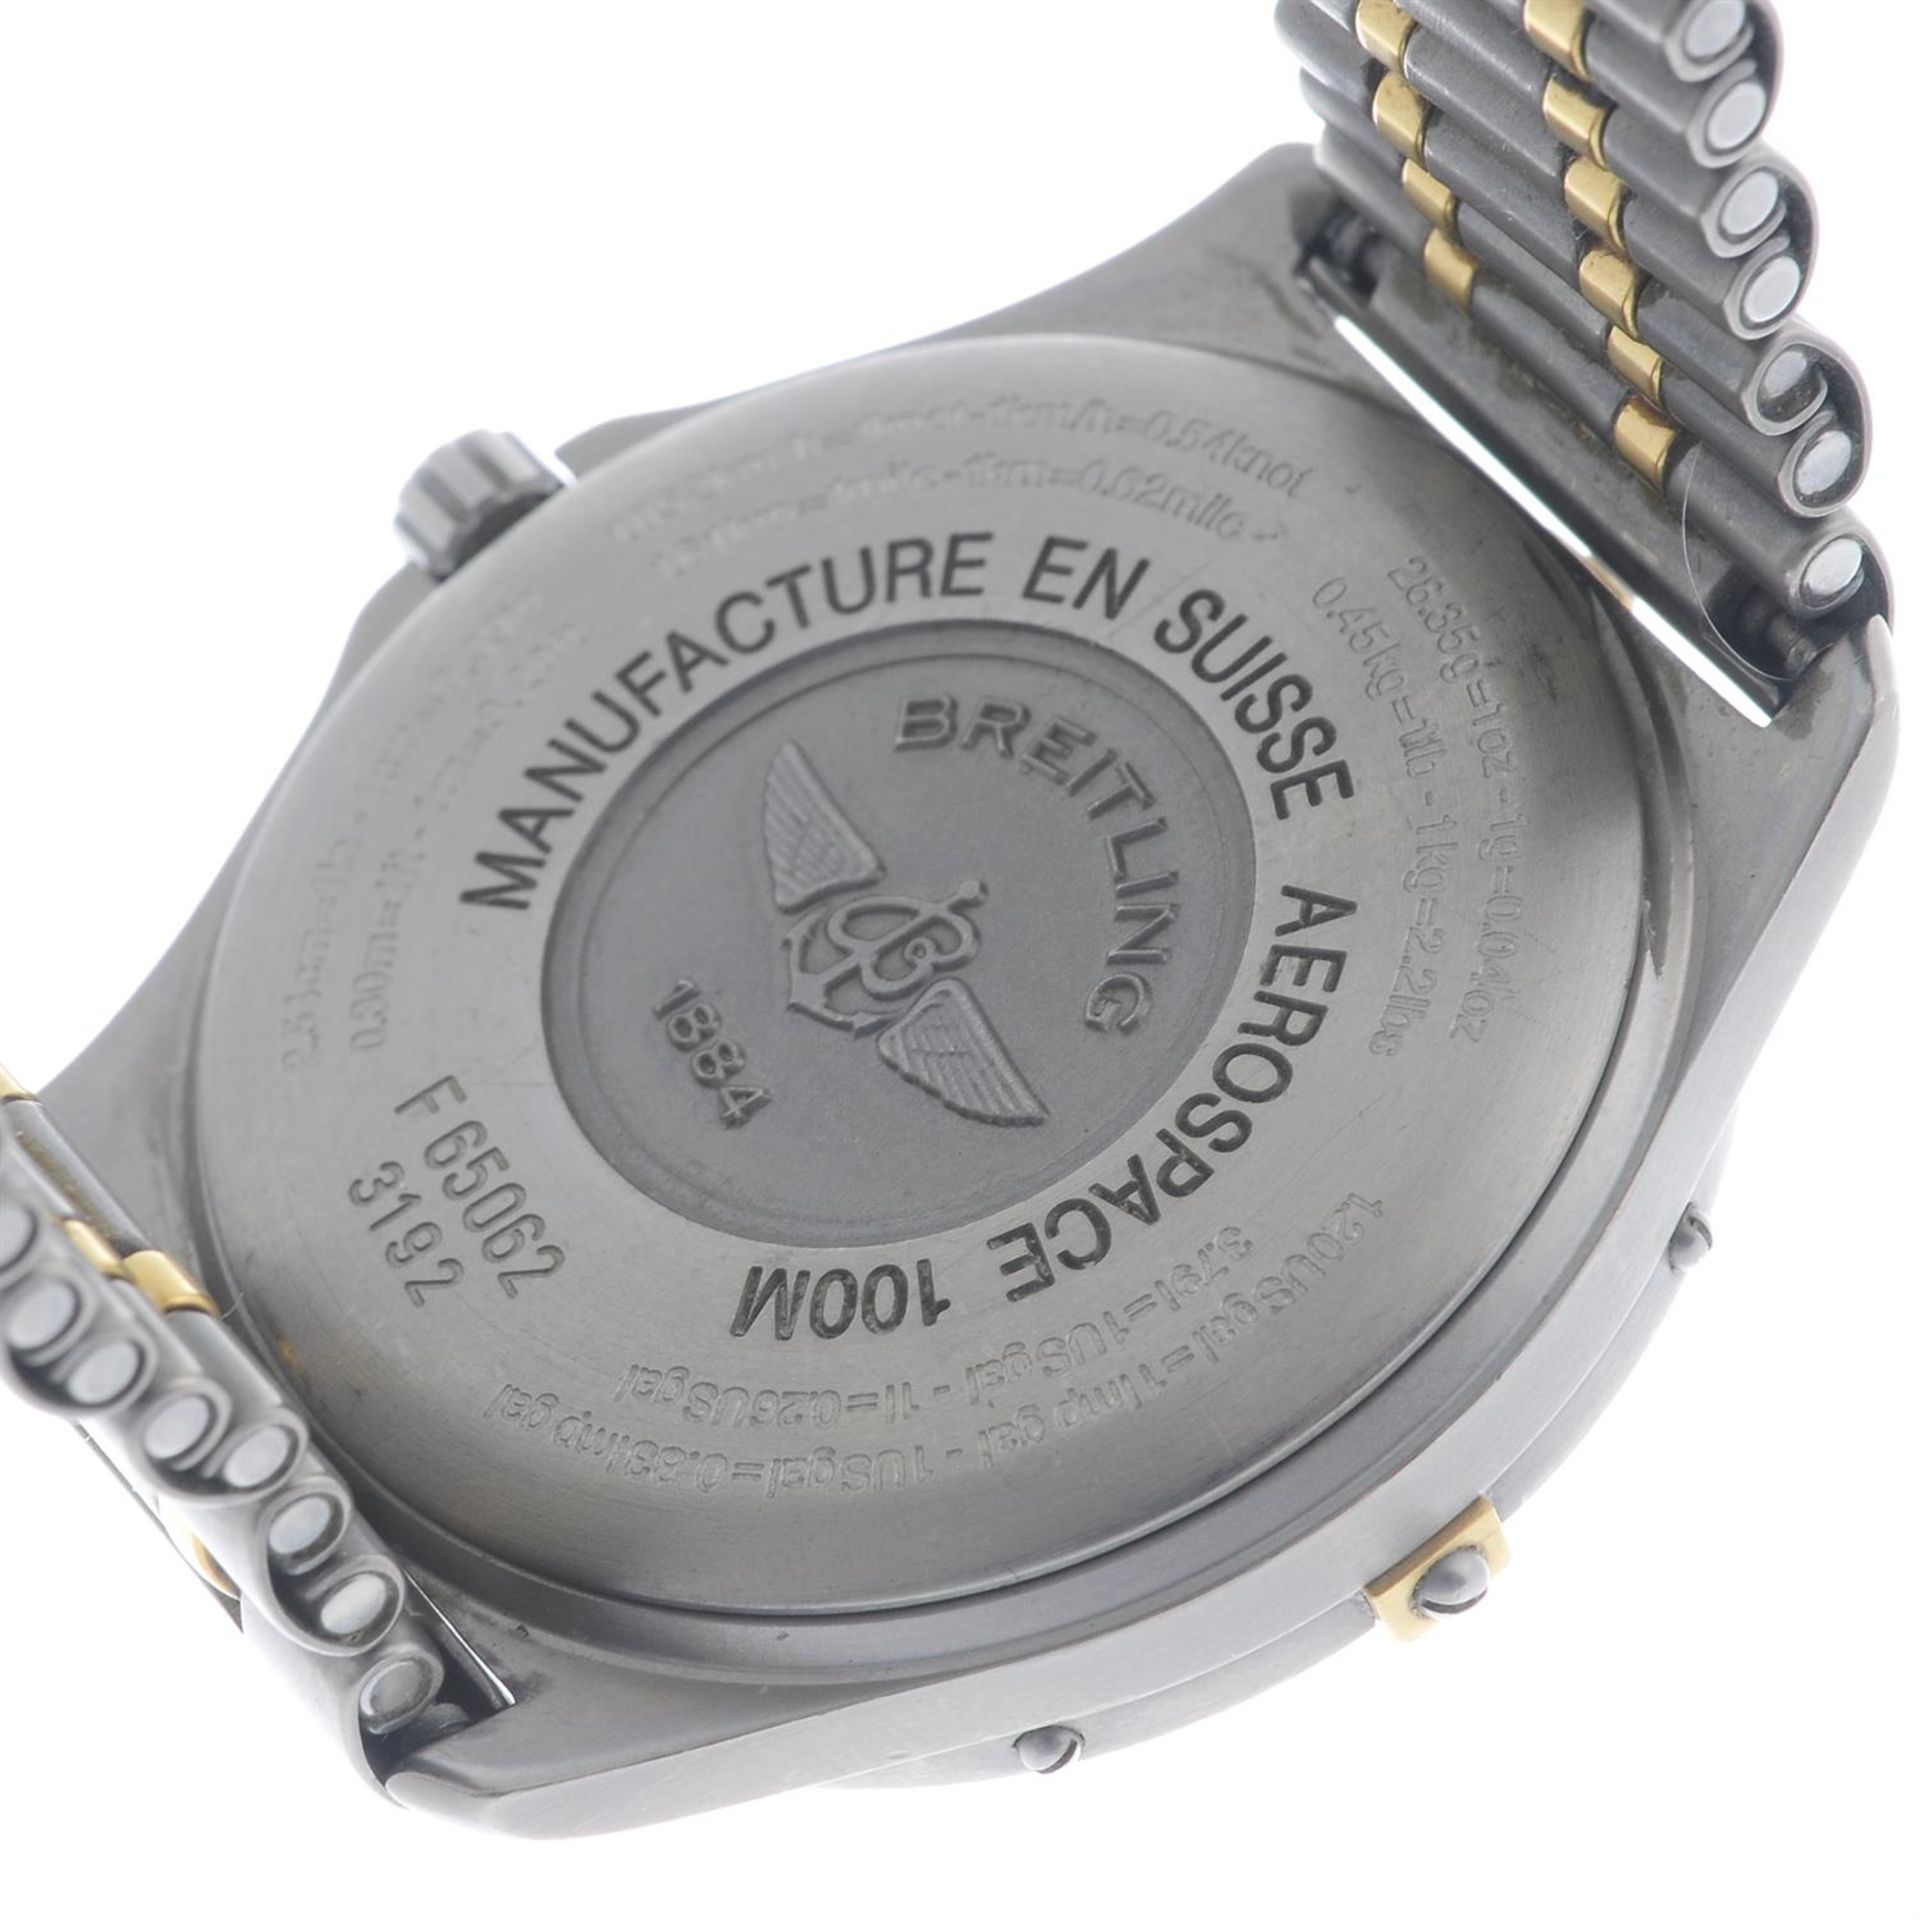 Breitling - an Aerospace watch, 40mm. - Image 4 of 5